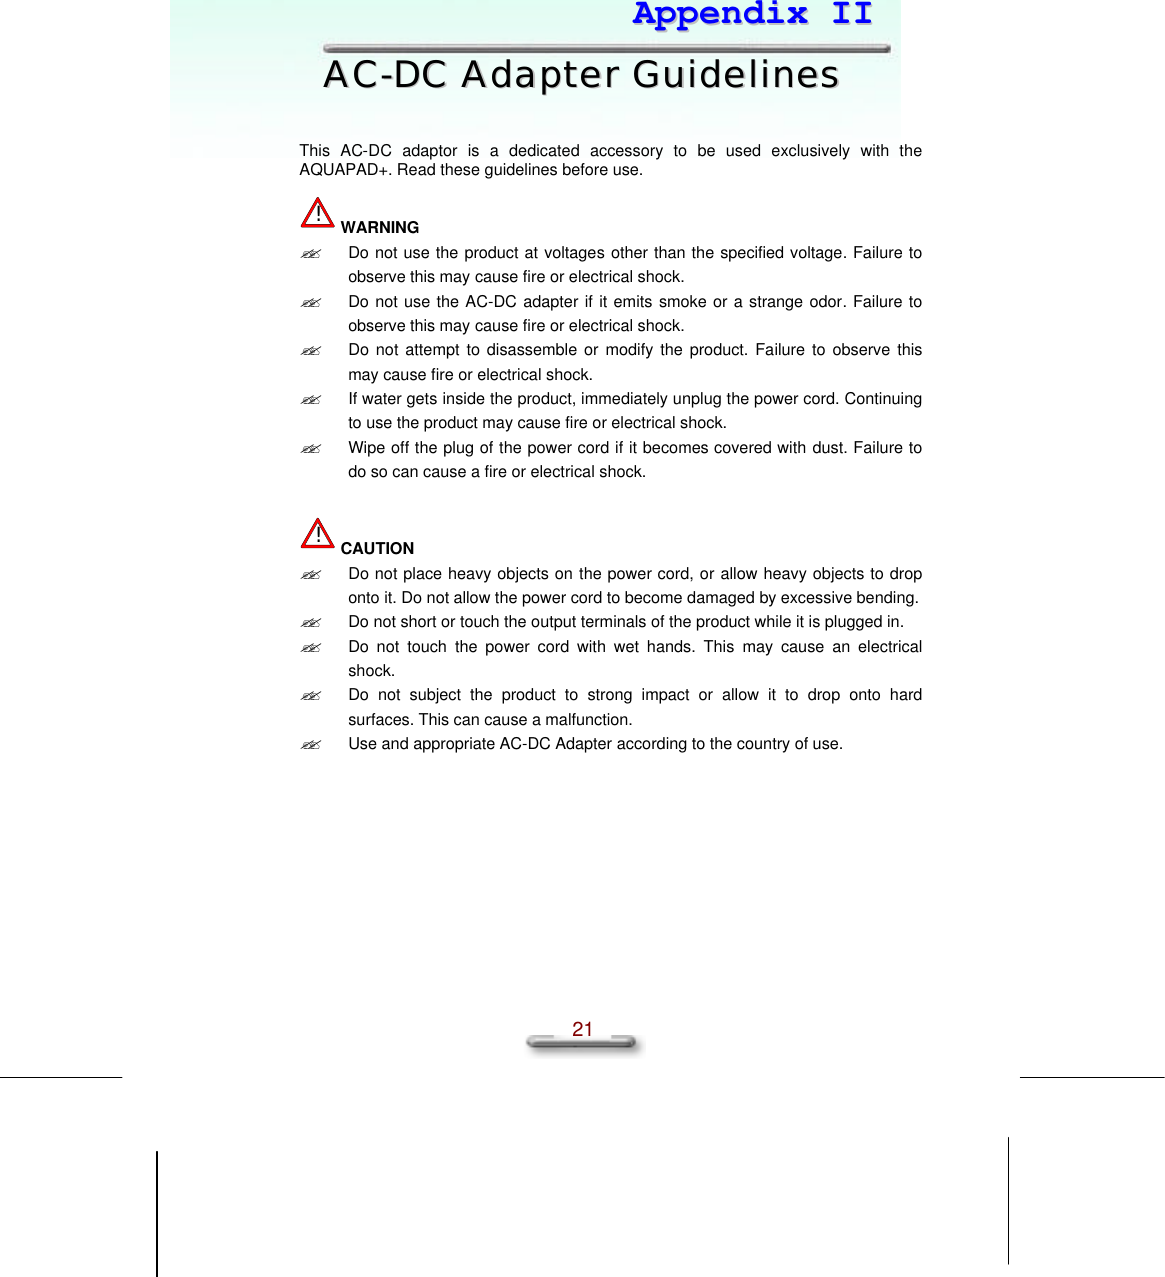   21  AAppppeennddiixx  IIII  AACC--DDCC  AAddaapptteerr  GGuuiiddeelliinneess   This AC-DC adaptor is a dedicated accessory to be used exclusively with the AQUAPAD+. Read these guidelines before use.  ! WARNING ?? Do not use the product at voltages other than the specified voltage. Failure to observe this may cause fire or electrical shock.  ?? Do not use the AC-DC adapter if it emits smoke or a strange odor. Failure to observe this may cause fire or electrical shock. ?? Do not attempt to disassemble or modify the product. Failure to observe this may cause fire or electrical shock. ?? If water gets inside the product, immediately unplug the power cord. Continuing to use the product may cause fire or electrical shock. ?? Wipe off the plug of the power cord if it becomes covered with dust. Failure to do so can cause a fire or electrical shock.   ! CAUTION ?? Do not place heavy objects on the power cord, or allow heavy objects to drop onto it. Do not allow the power cord to become damaged by excessive bending. ?? Do not short or touch the output terminals of the product while it is plugged in. ?? Do not touch  the power cord with wet hands. This may  cause an electrical shock. ?? Do not subject the product to strong impact or allow it to drop onto hard surfaces. This can cause a malfunction. ?? Use and appropriate AC-DC Adapter according to the country of use.  